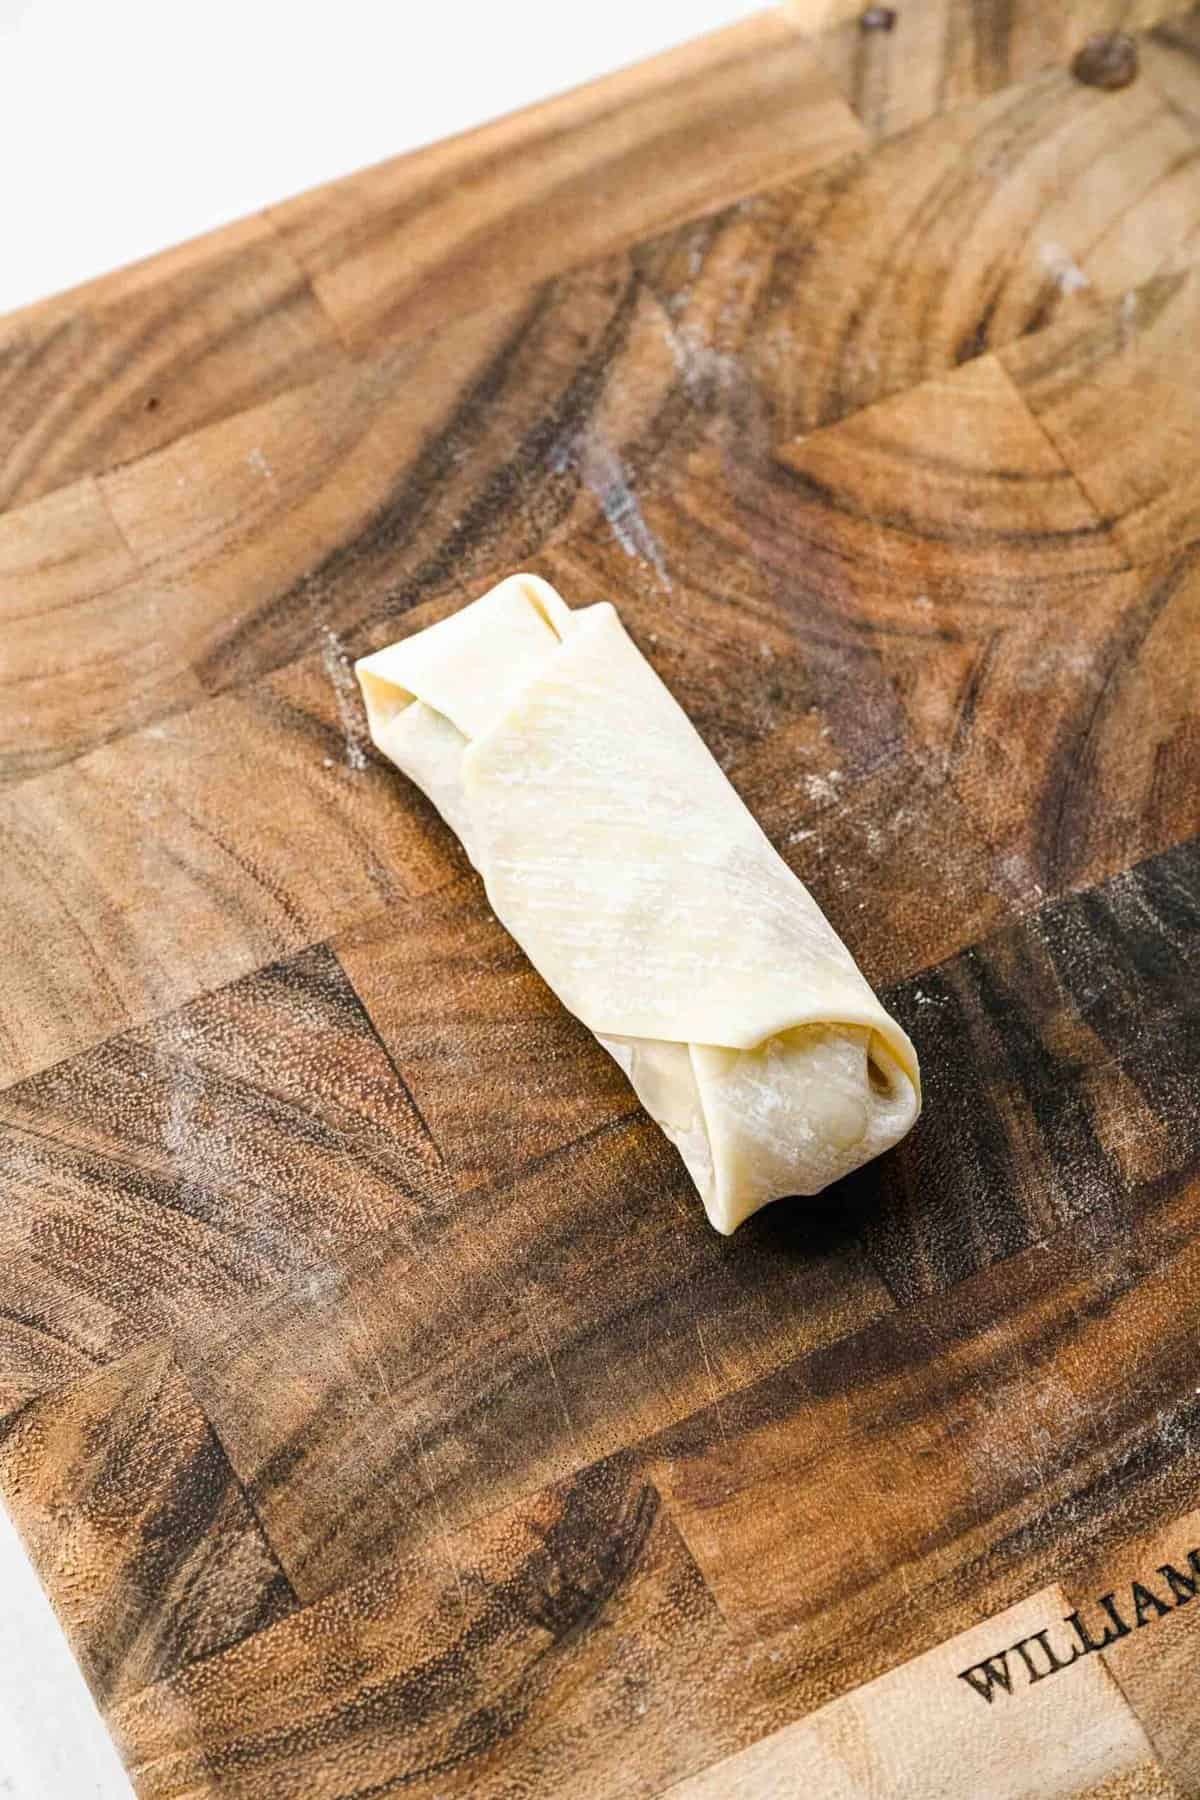 A crispy golden spring roll ready to be fried.